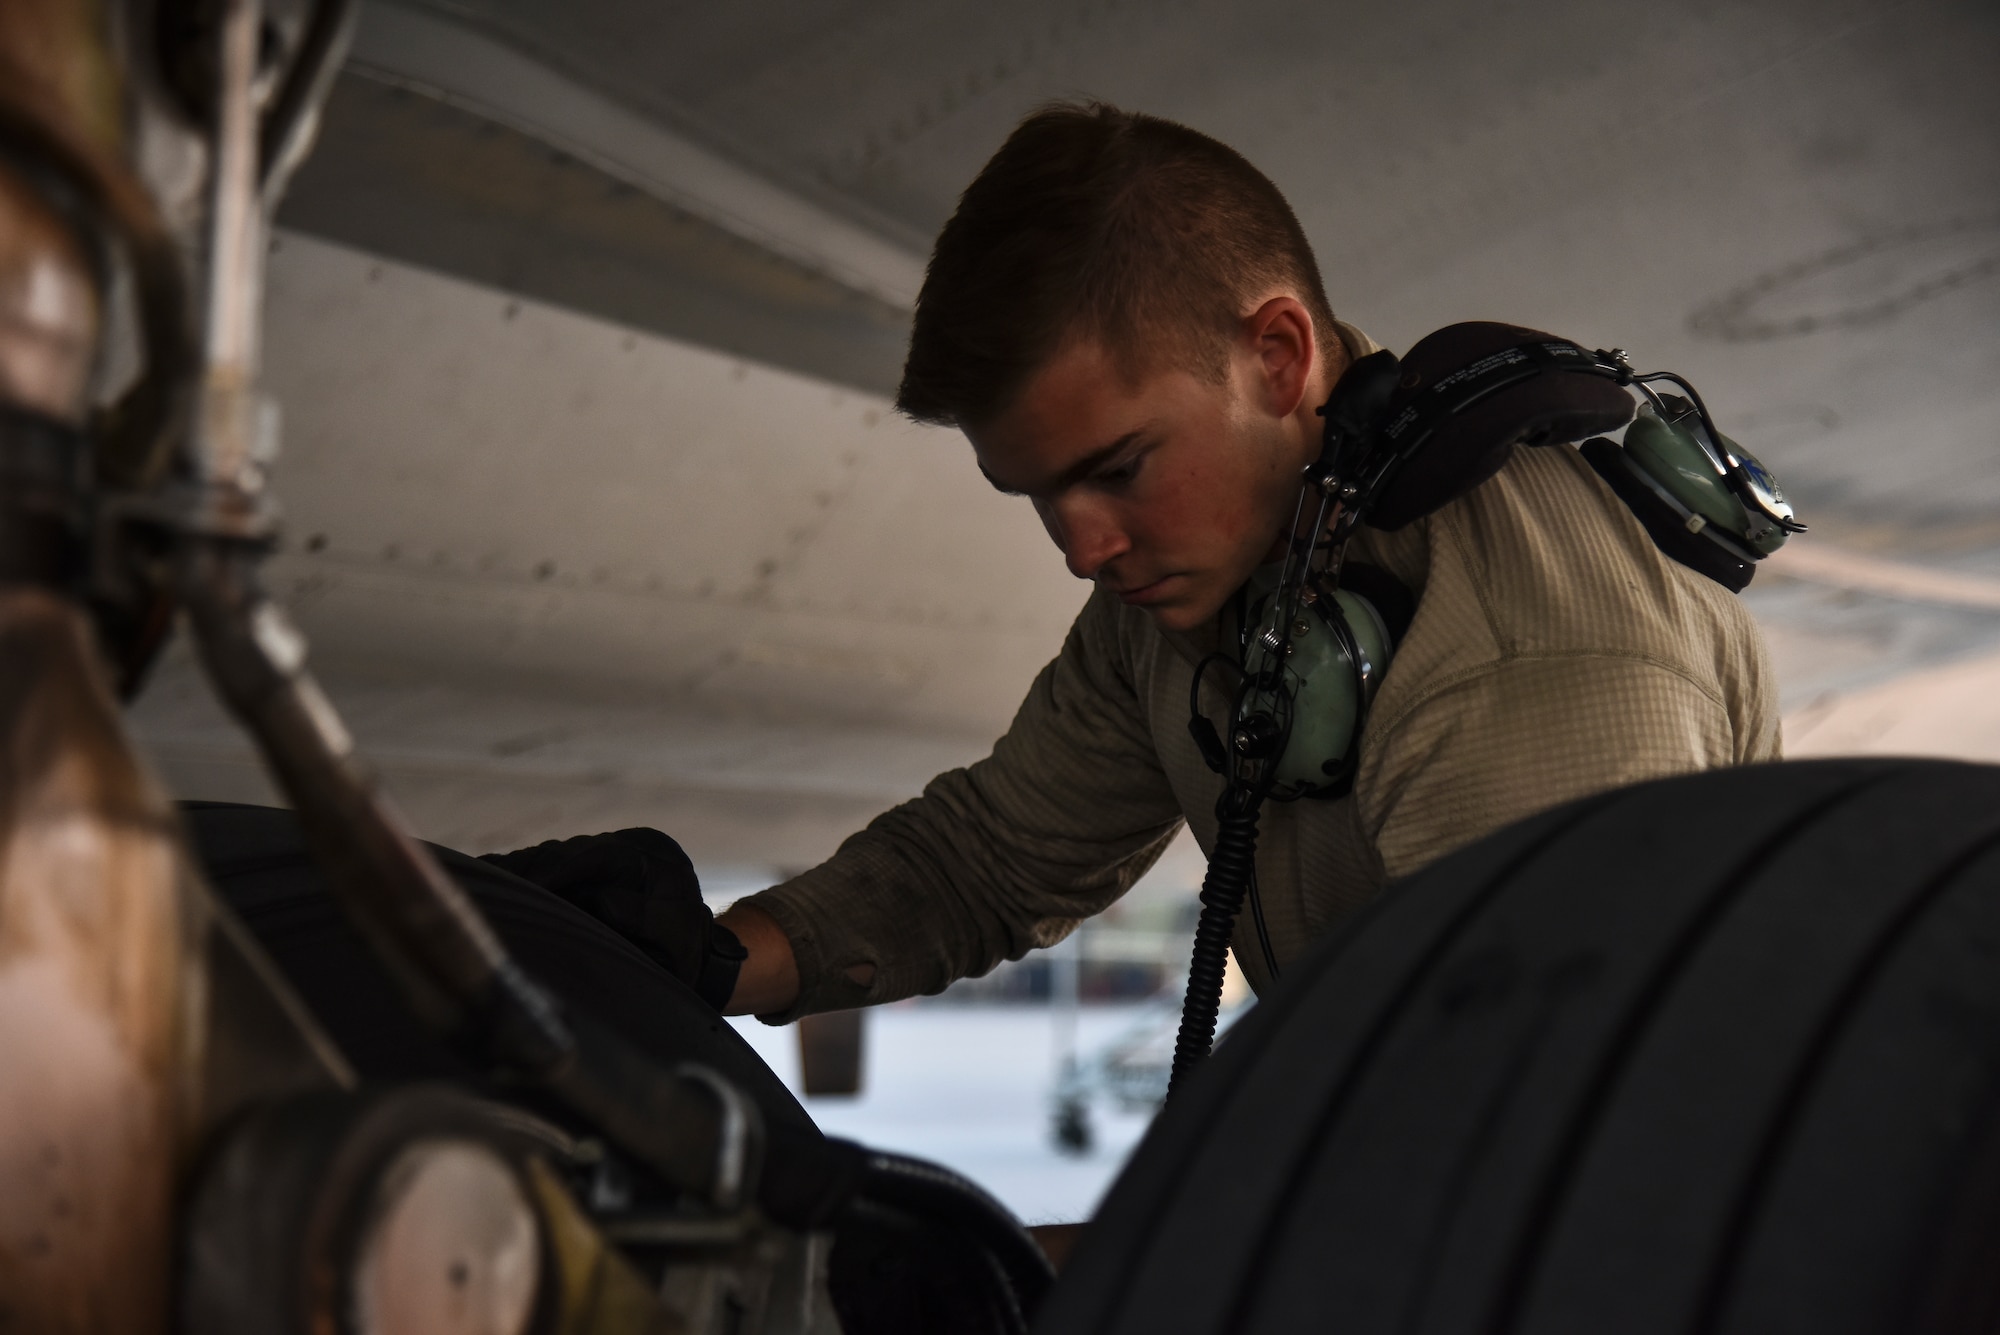 U.S. Air Force Senior Airman Gilbert, 380th Expeditionary Aircraft Maintenance Squadron E-3 AWACS Sentry crew chief, inspects a tire of a KC-10 during a pre-flight inspection at Al Dhafra Air Base, United Arab Emirates, Dec. 20, 2018. The crew chief’s extensive list of responsibilities including for pre-, post- and thru-flight checks, and well as various inspections, allows them to fully understand their vital role, making them jacks-of-all-trades when it comes to repairing the aircraft. (U.S. Air Force photo by Senior Airman Mya M. Crosby)